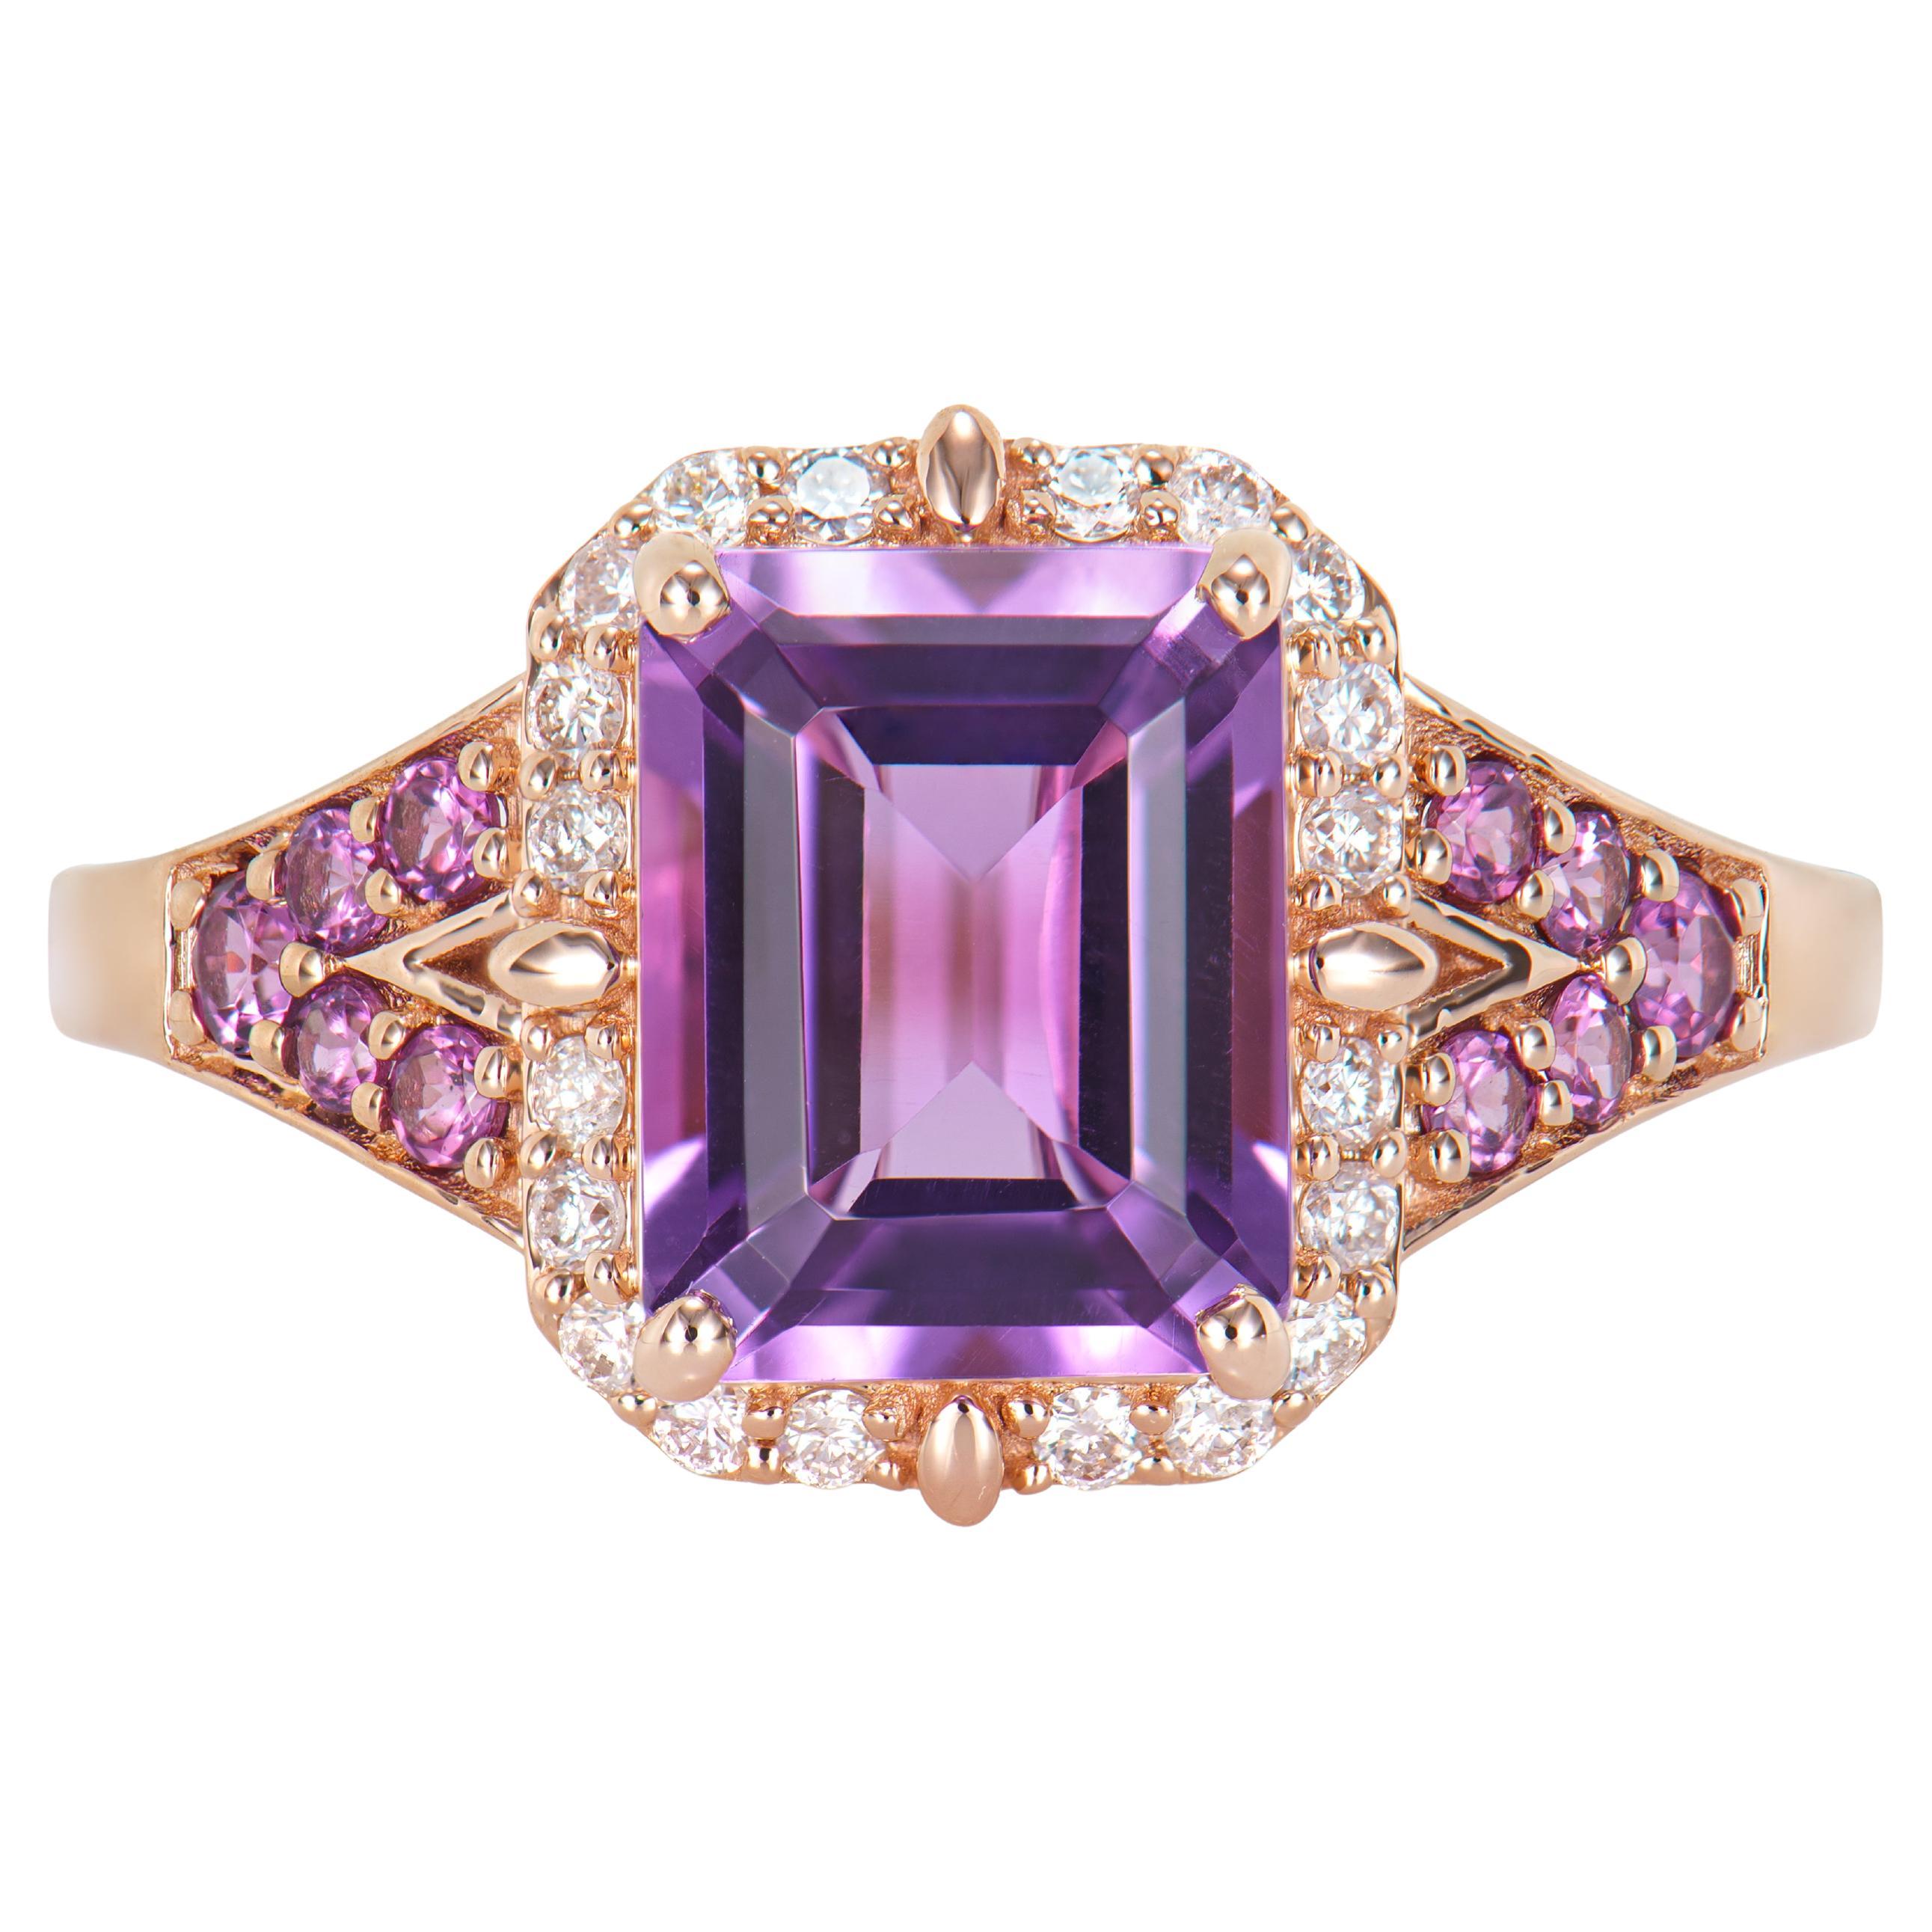 2.21 Carat Amethyst Fancy Ring in 14KRG with Rhodolite and White Diamond.   For Sale